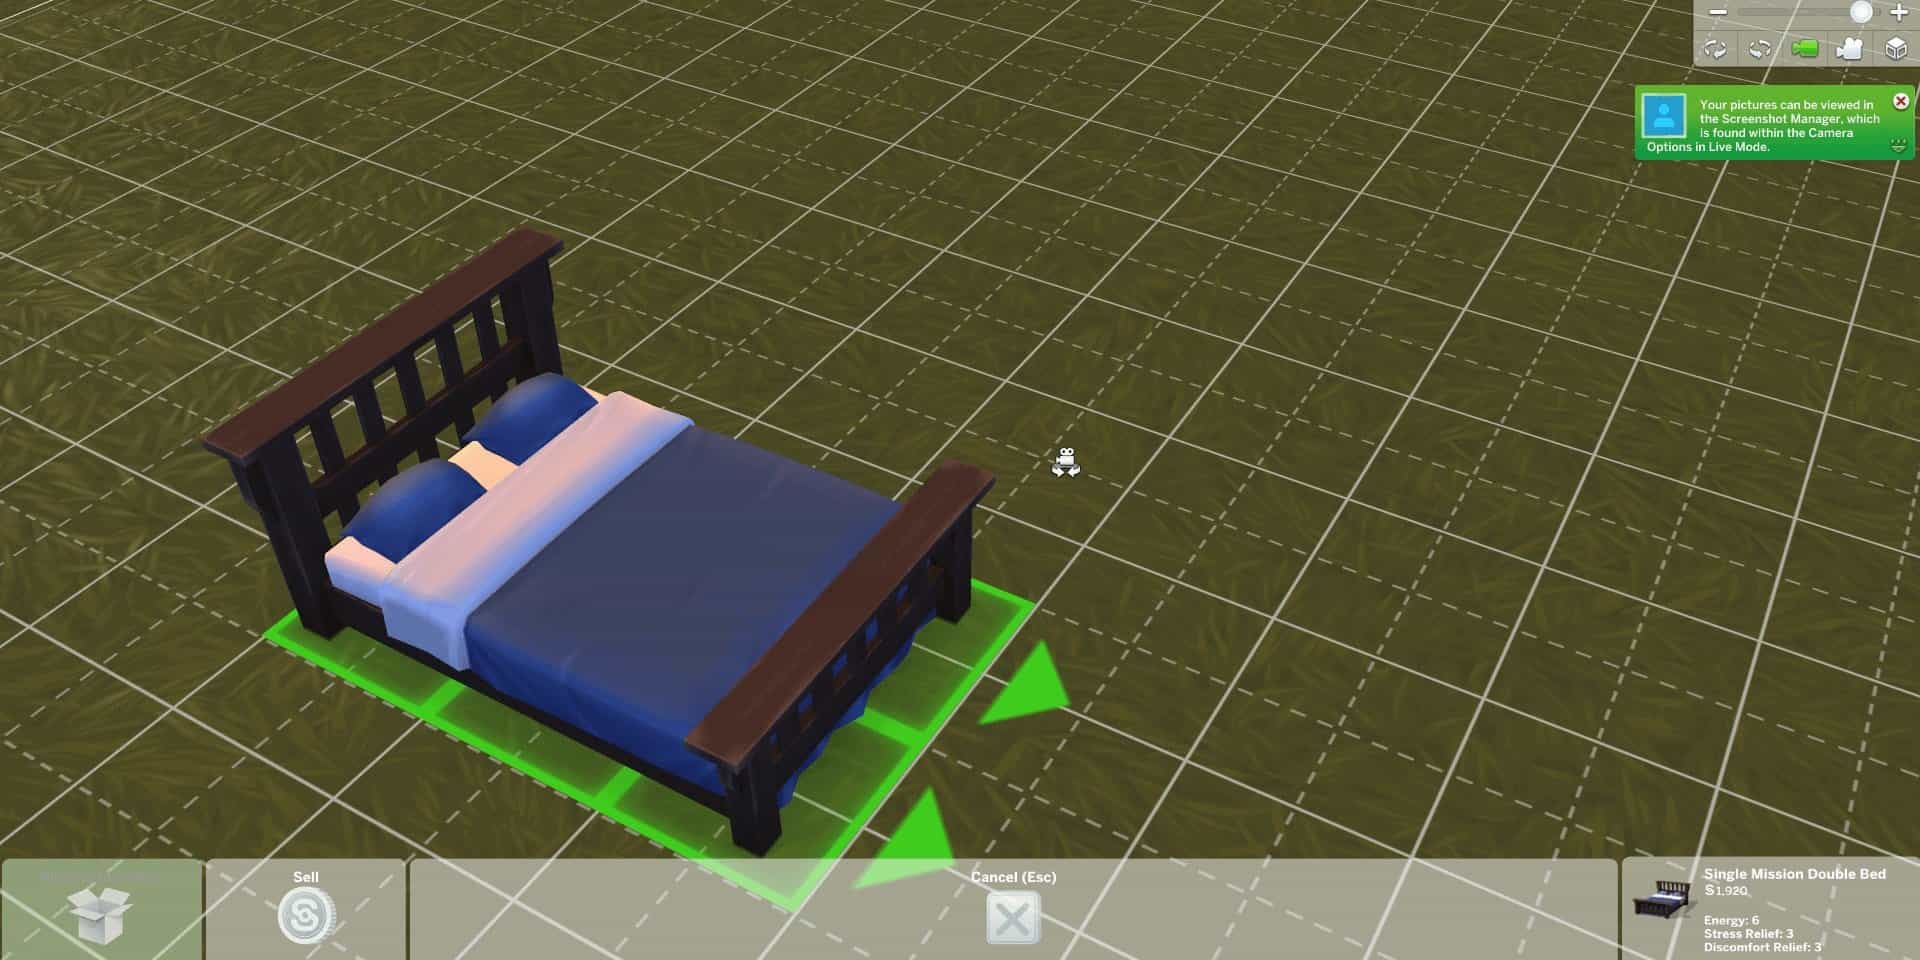 Rotating a bed in The Sims 4.